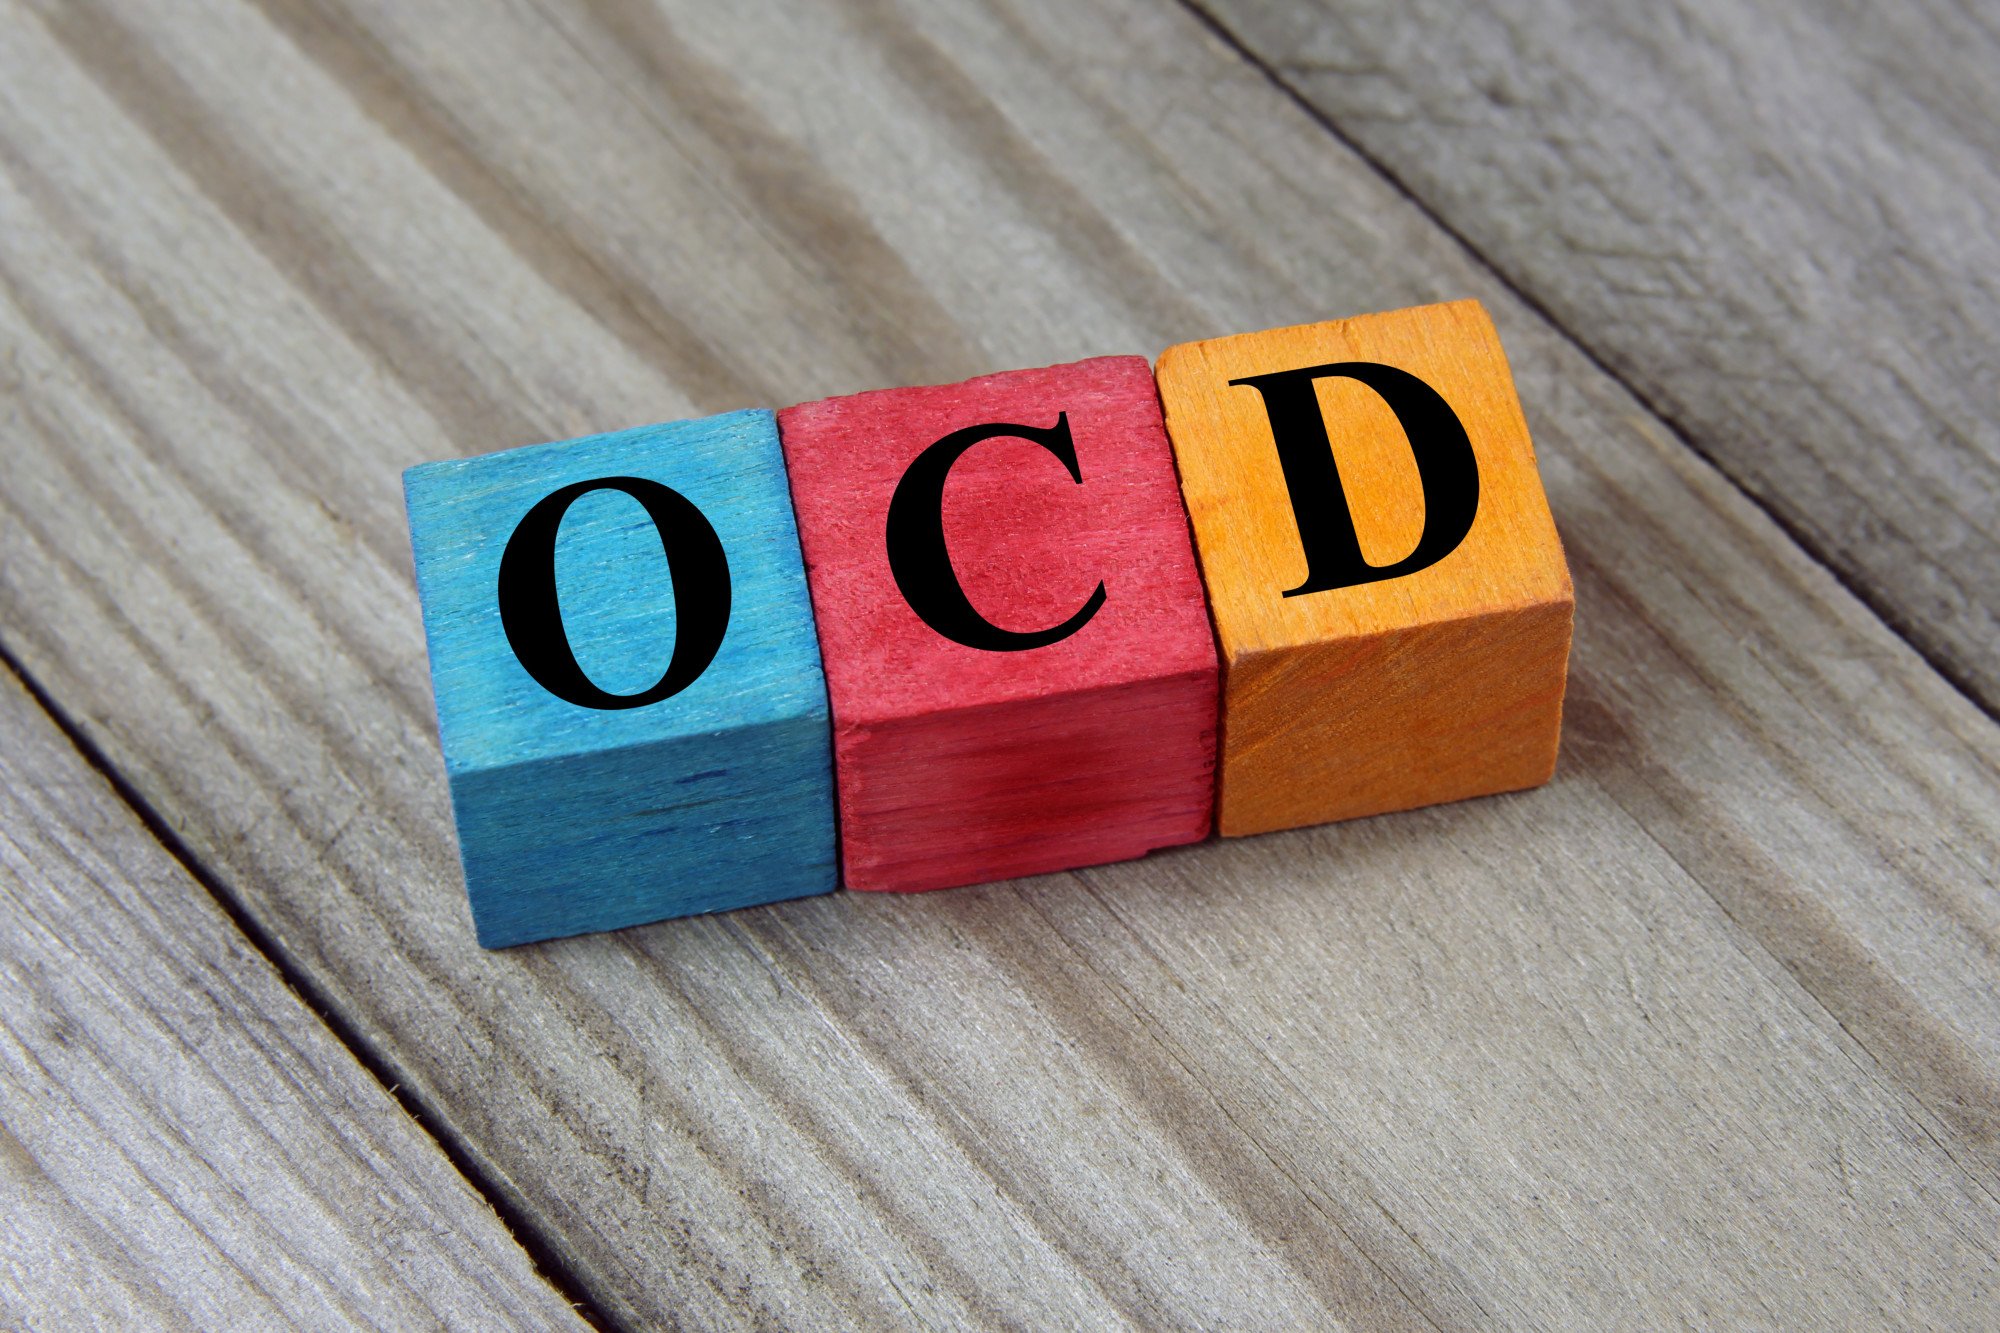 Are you familiar with OCD treatment centers? You can read about choosing the most suitable option to help with OCD symptoms.